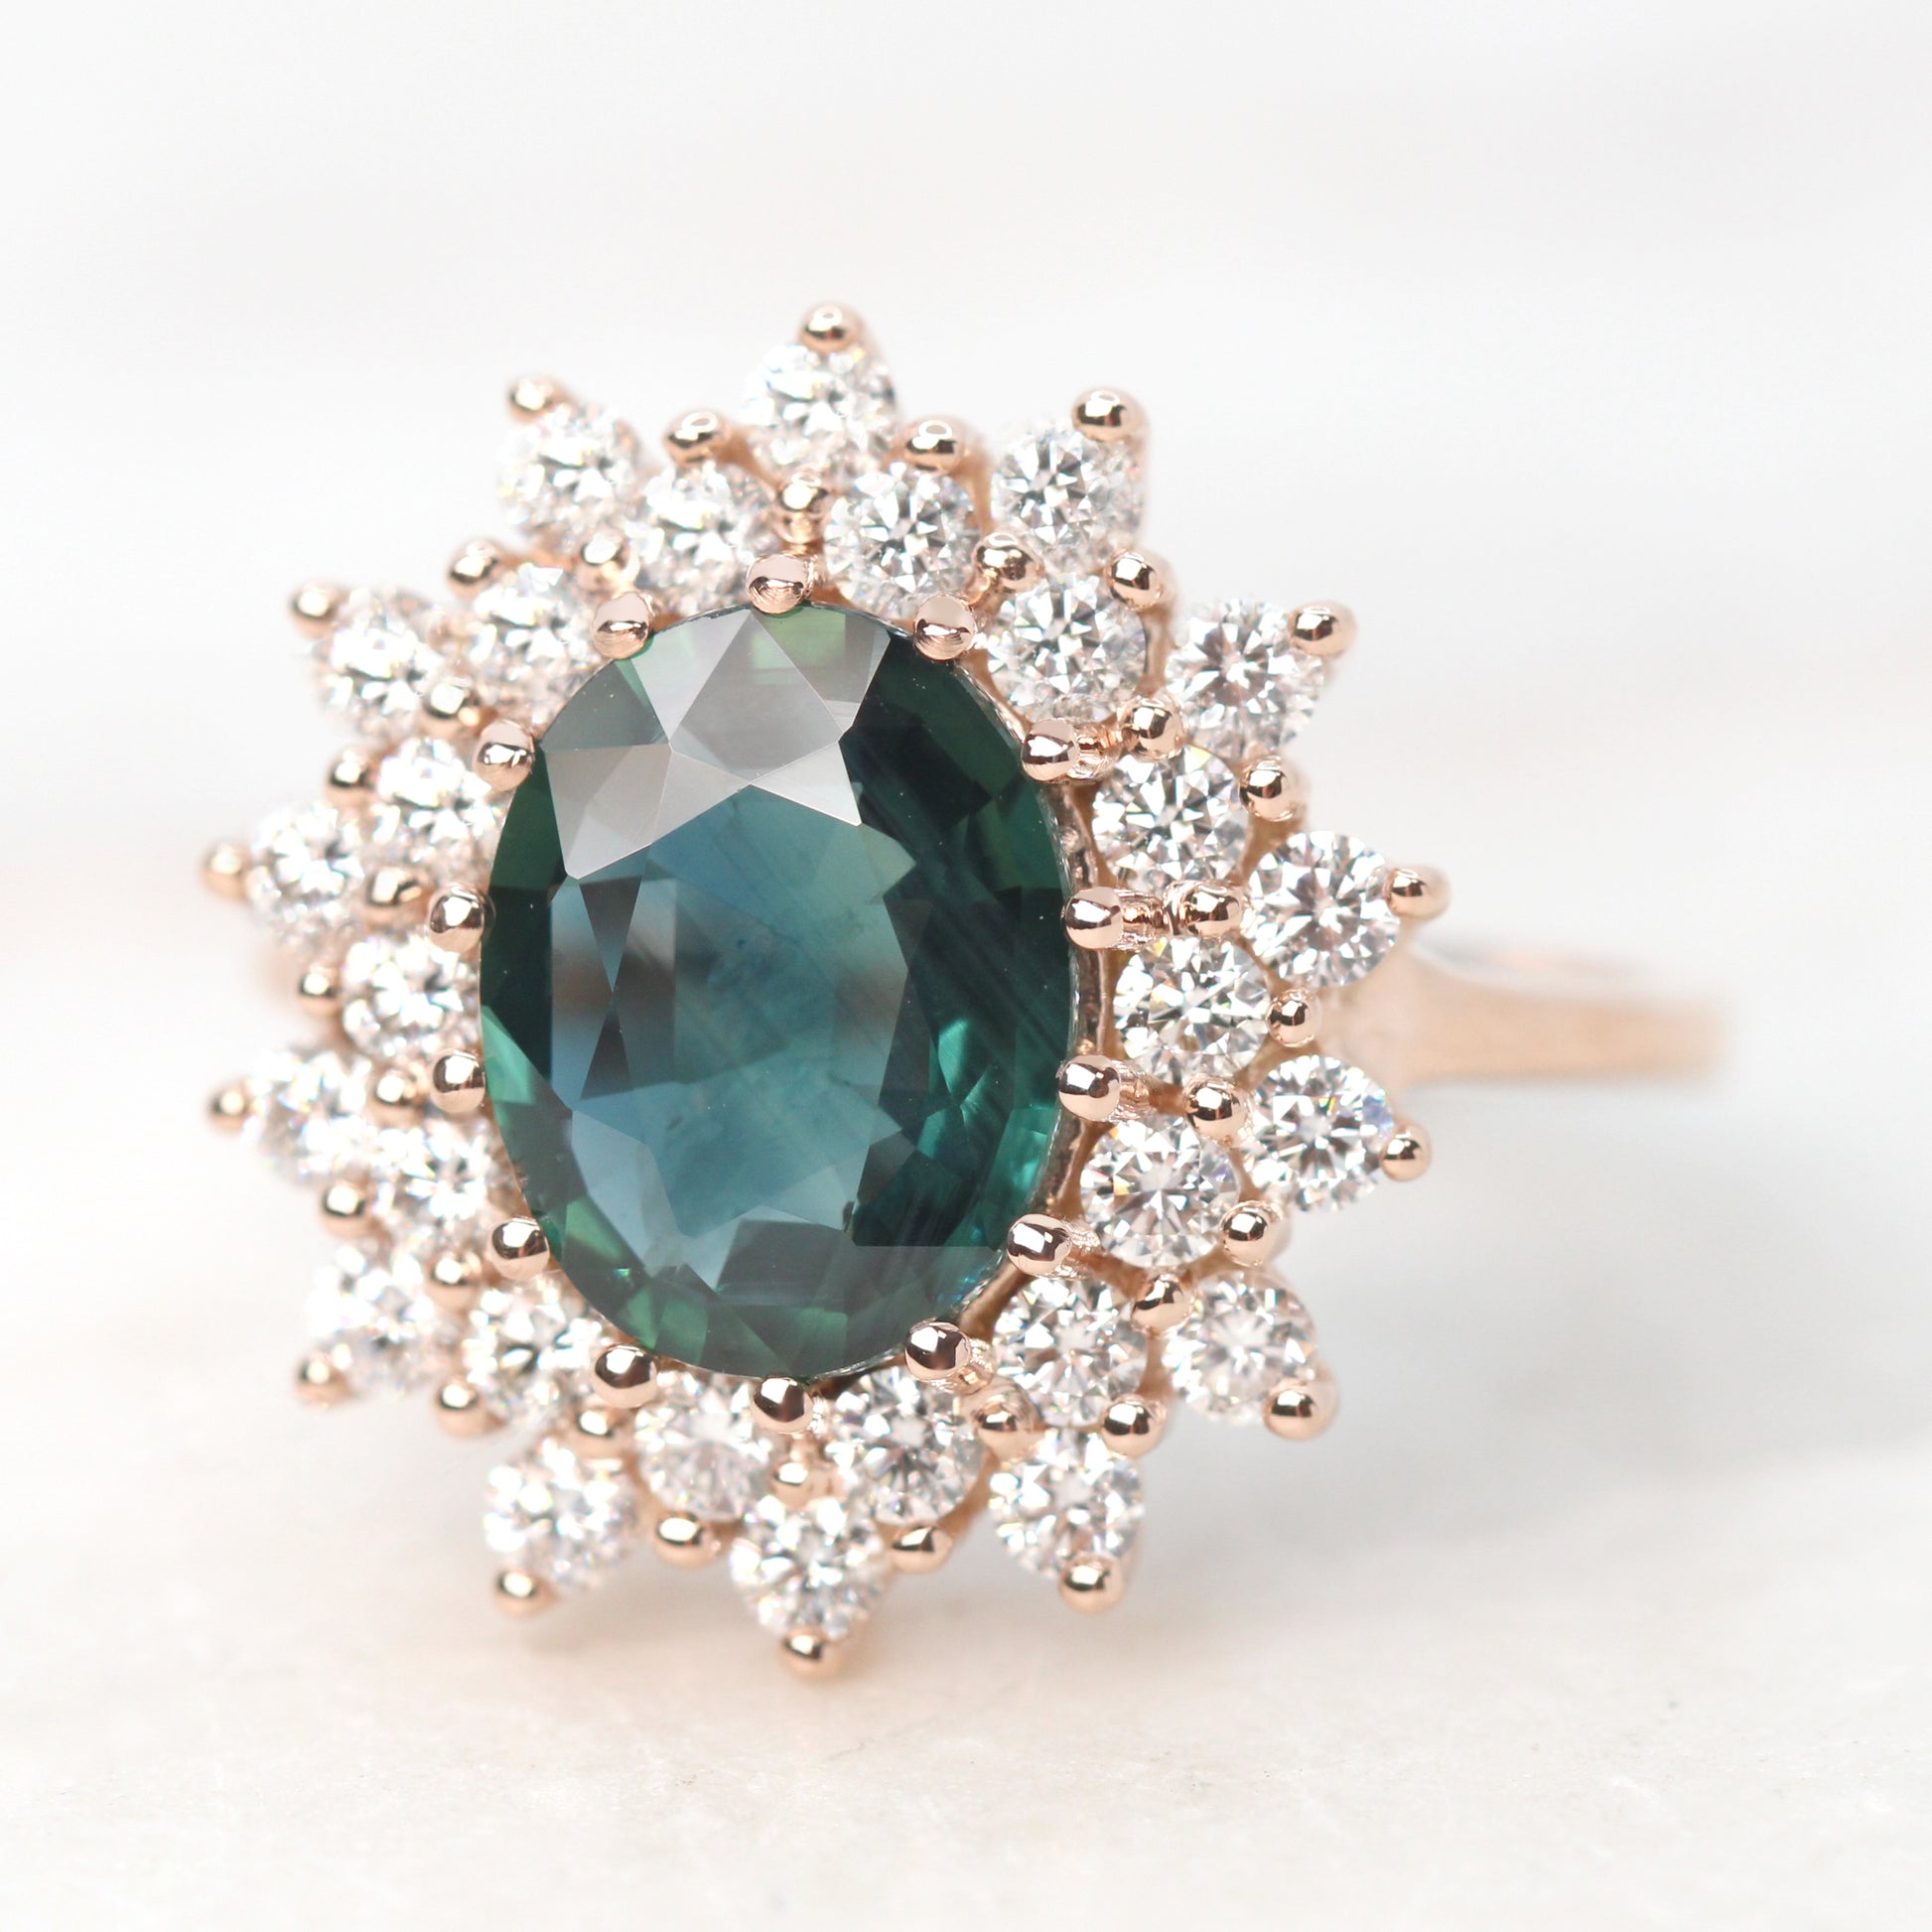 Catherine Ring with a 2.40 Carat Teal Oval Sapphire and White Accent Diamonds in 14k Rose Gold - Ready to Size and Ship - Midwinter Co. Alternative Bridal Rings and Modern Fine Jewelry